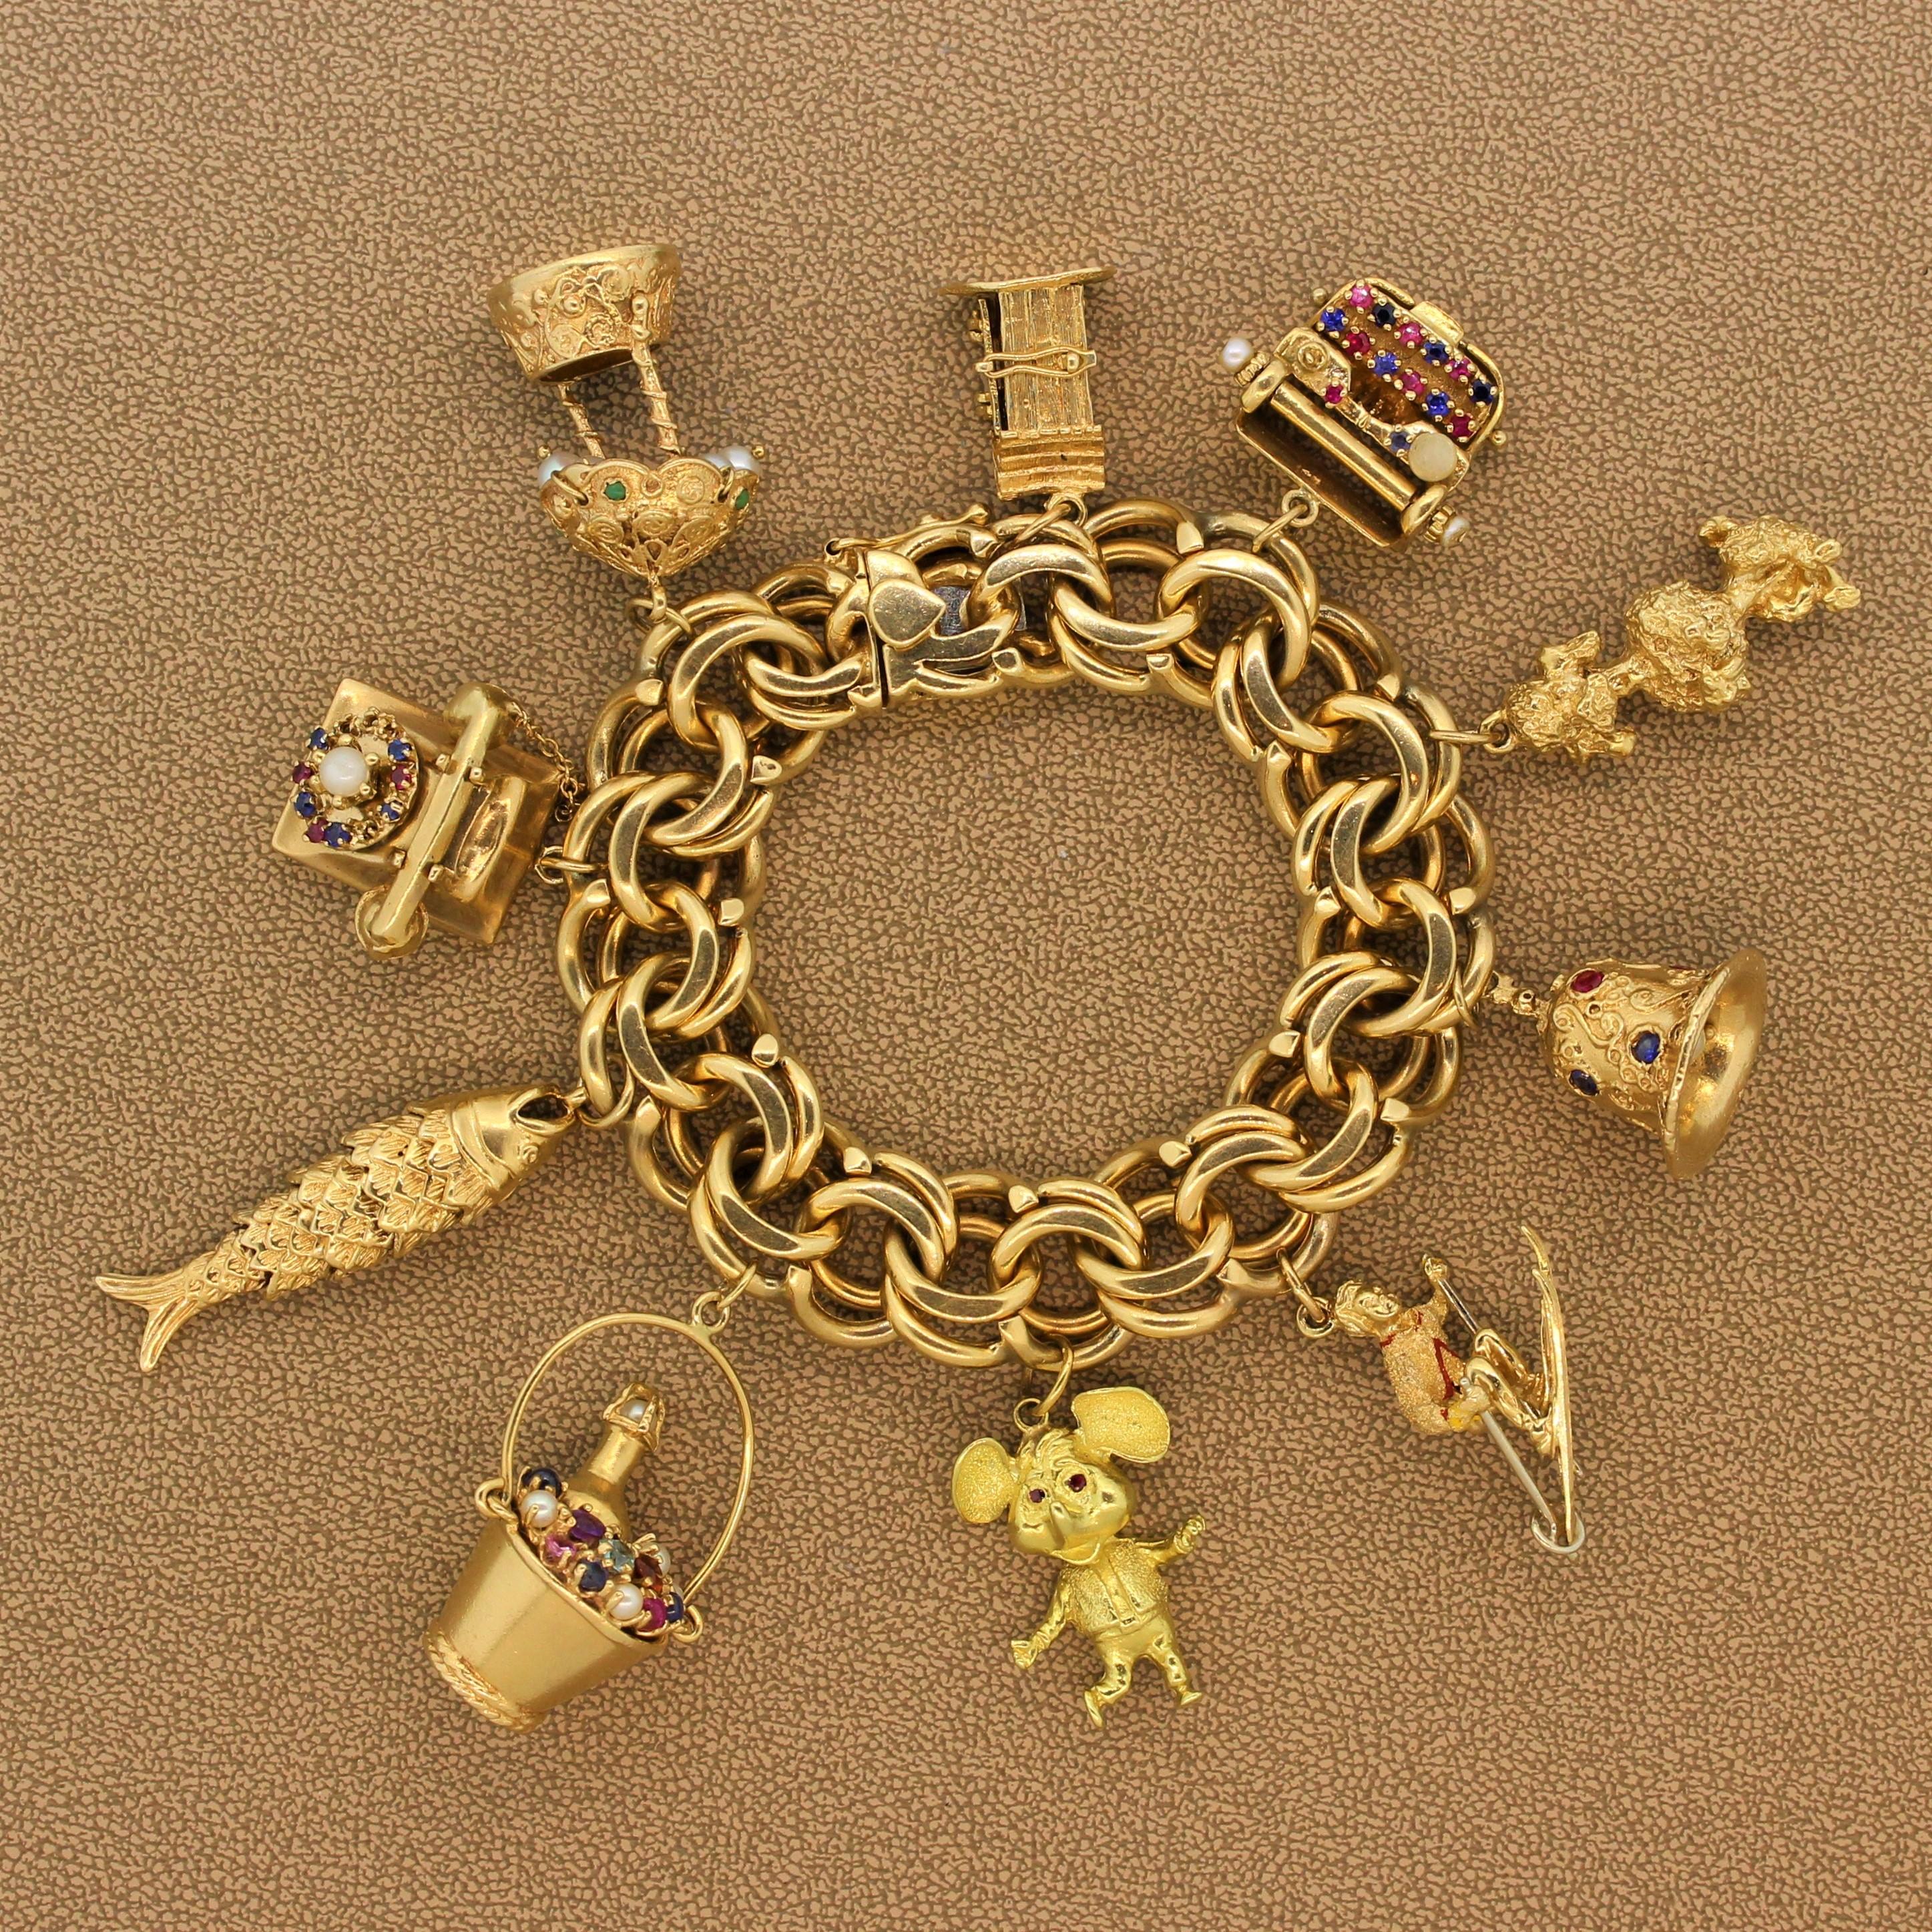 Charmed! This estate charm bracelet made of 14K yellow gold linked hoops has ten uniquely fun charms. A cabin, typewriter, poodle, bell, skier, cartoon mouse, champagne, fish, telephone and canopy with multi-color gemstones and pearls make this